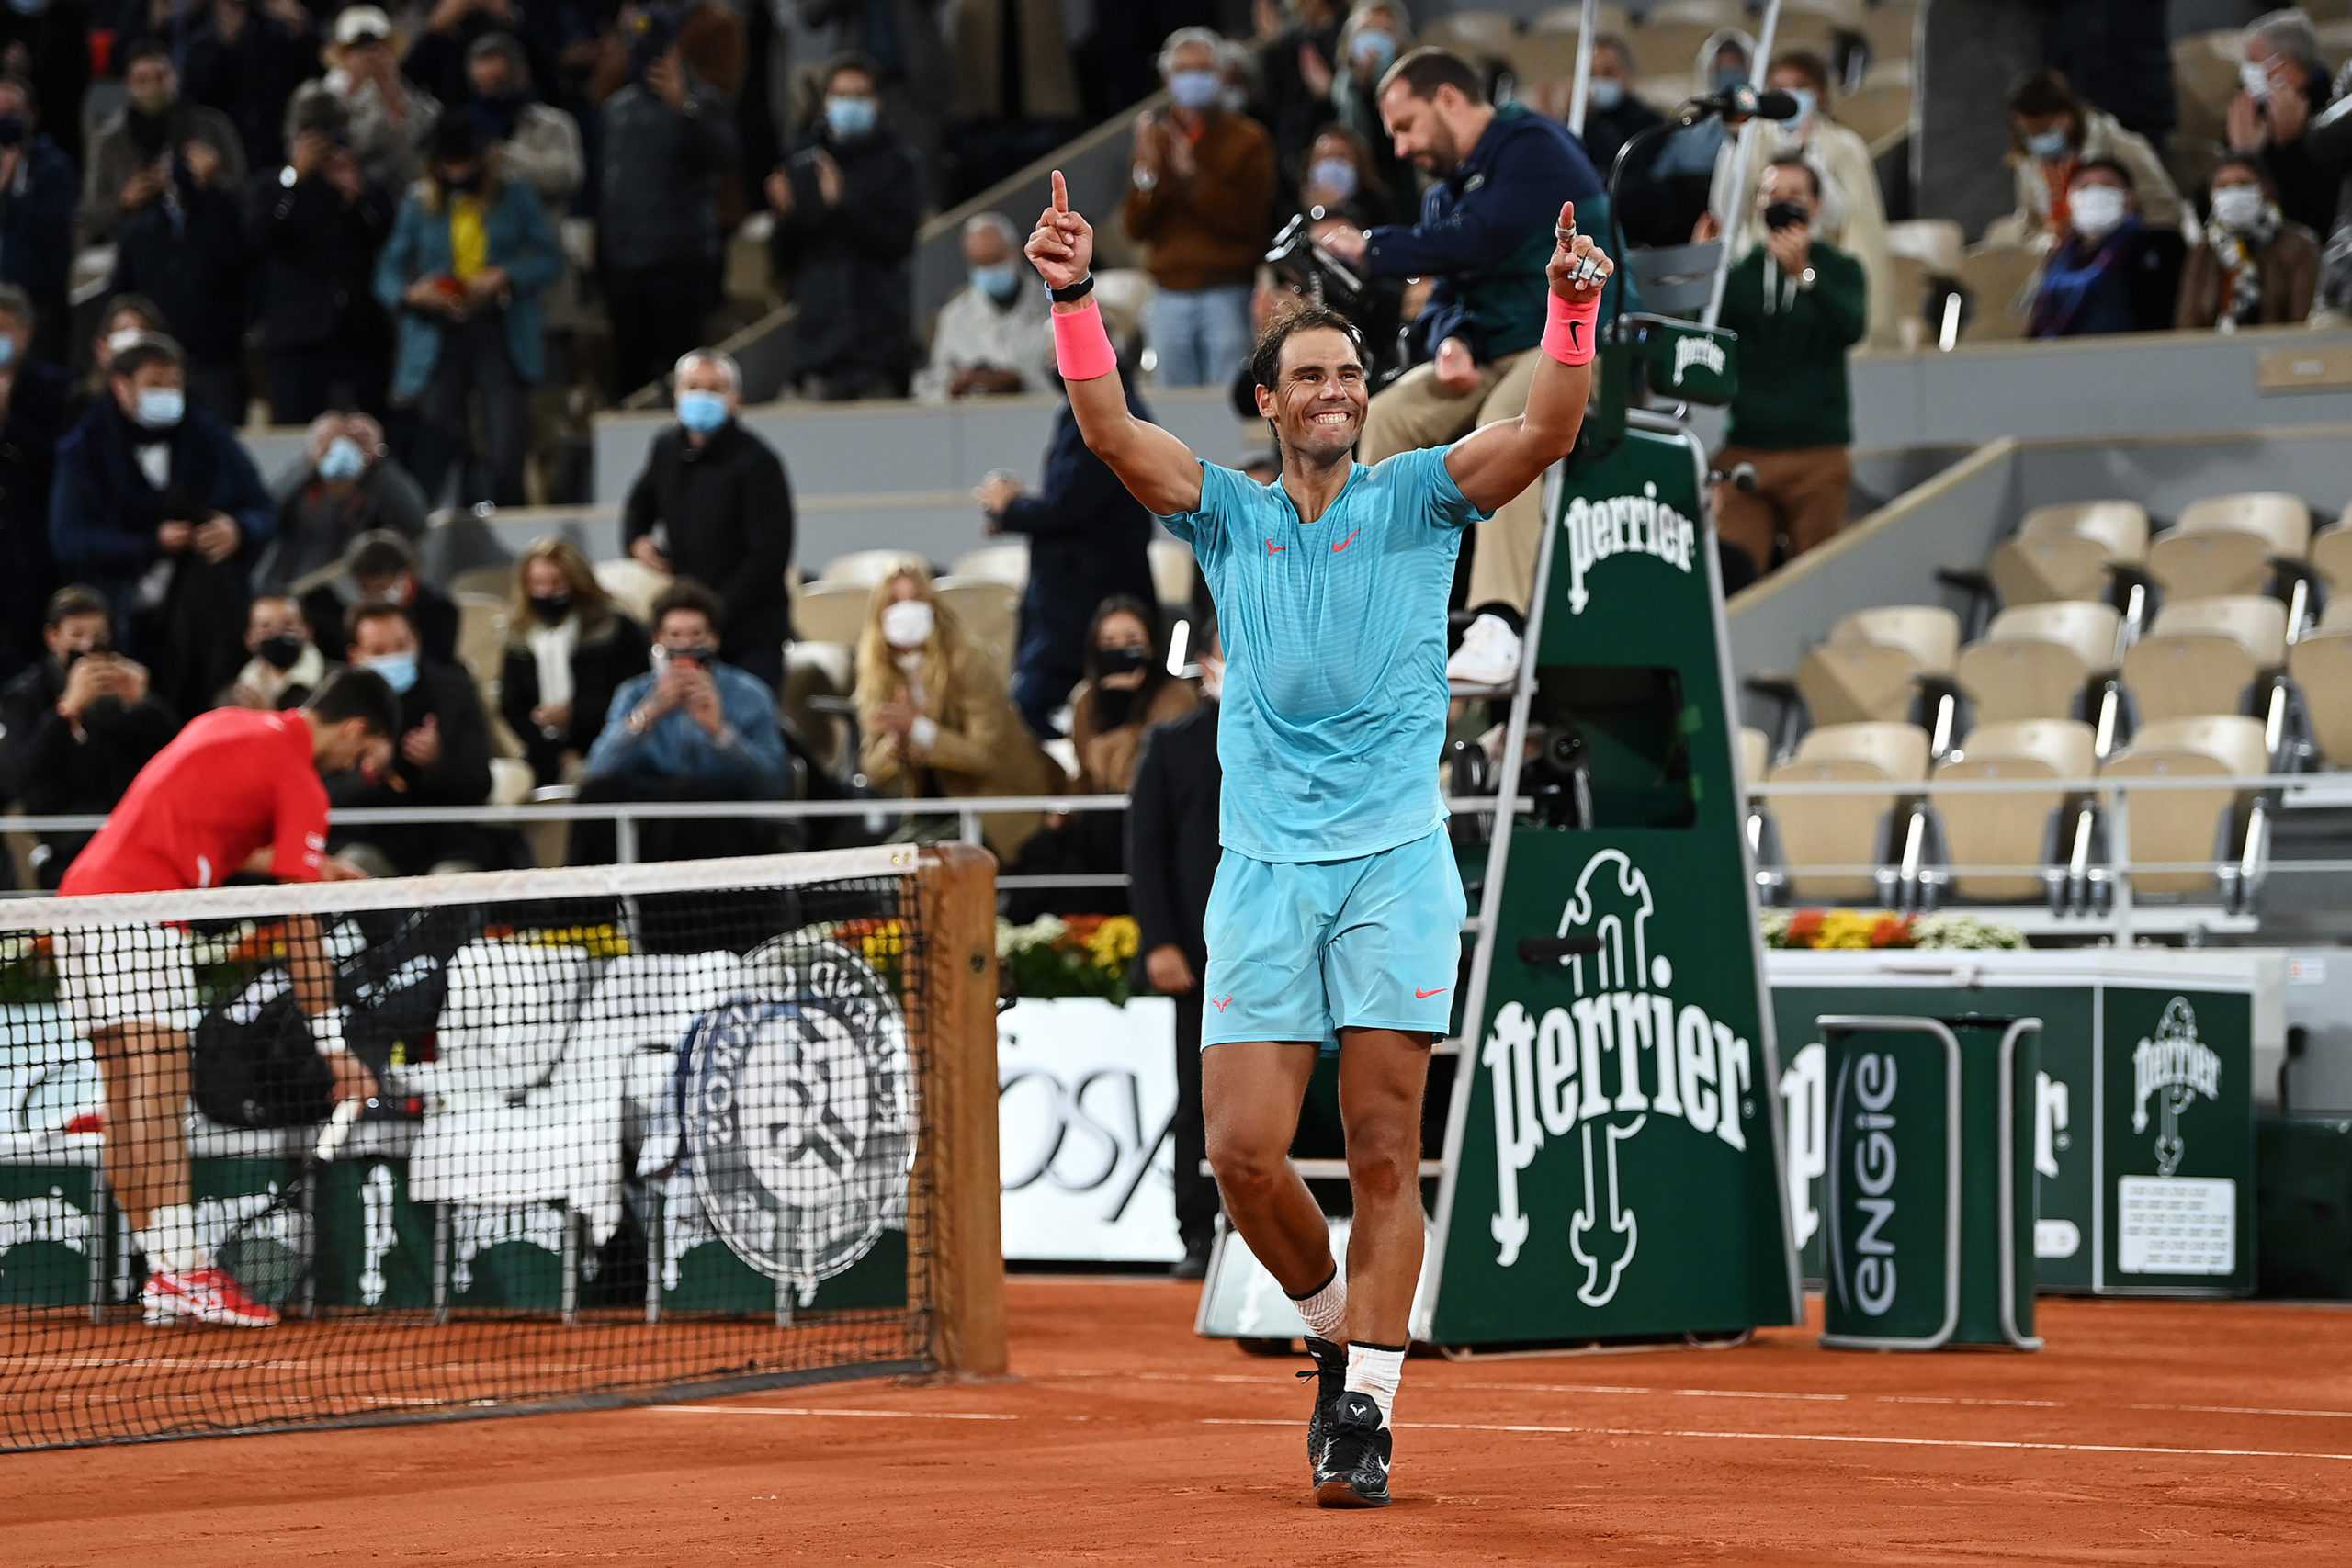 Rafael Nadal of Spain celebrates after winning championship point during his Mens Singles Final against Novak Djokovic of Serbia on day 15 of the 2020 French Open at Roland Garros on Sunday, Oct. 11, 2020 in Paris, France. (Shaun Botterill/Getty Images/TNS)